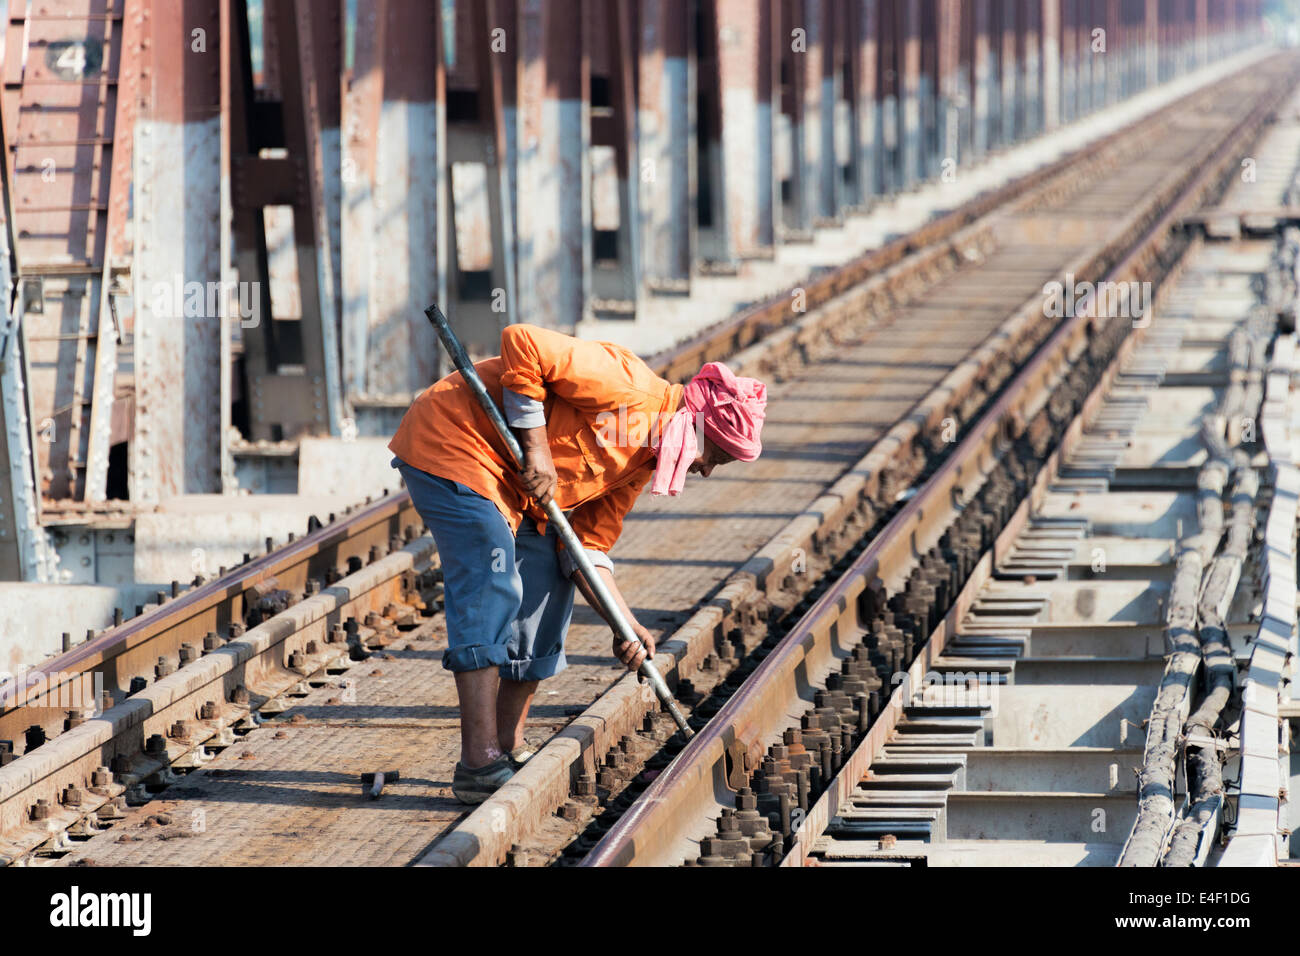 AGRA, INDIA - DECEMBER 2013: An Indian railway worker tightens a bolt on a railway track in Agra, India in December 2013. Stock Photo